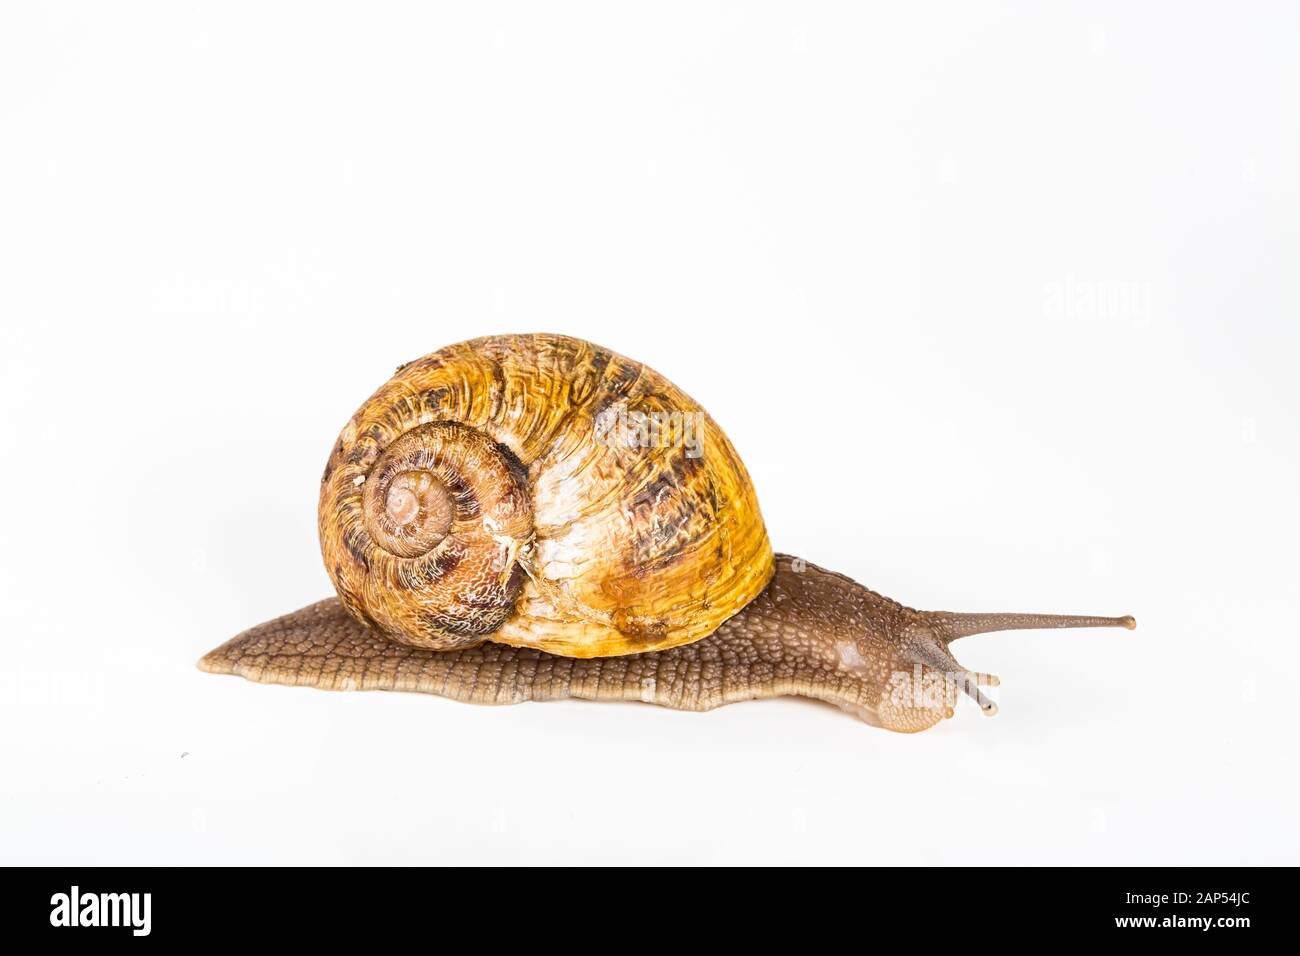 Brown snail on white background. To be used for background for fashion cosmetics and treatments made with snails slime. Stock Photo